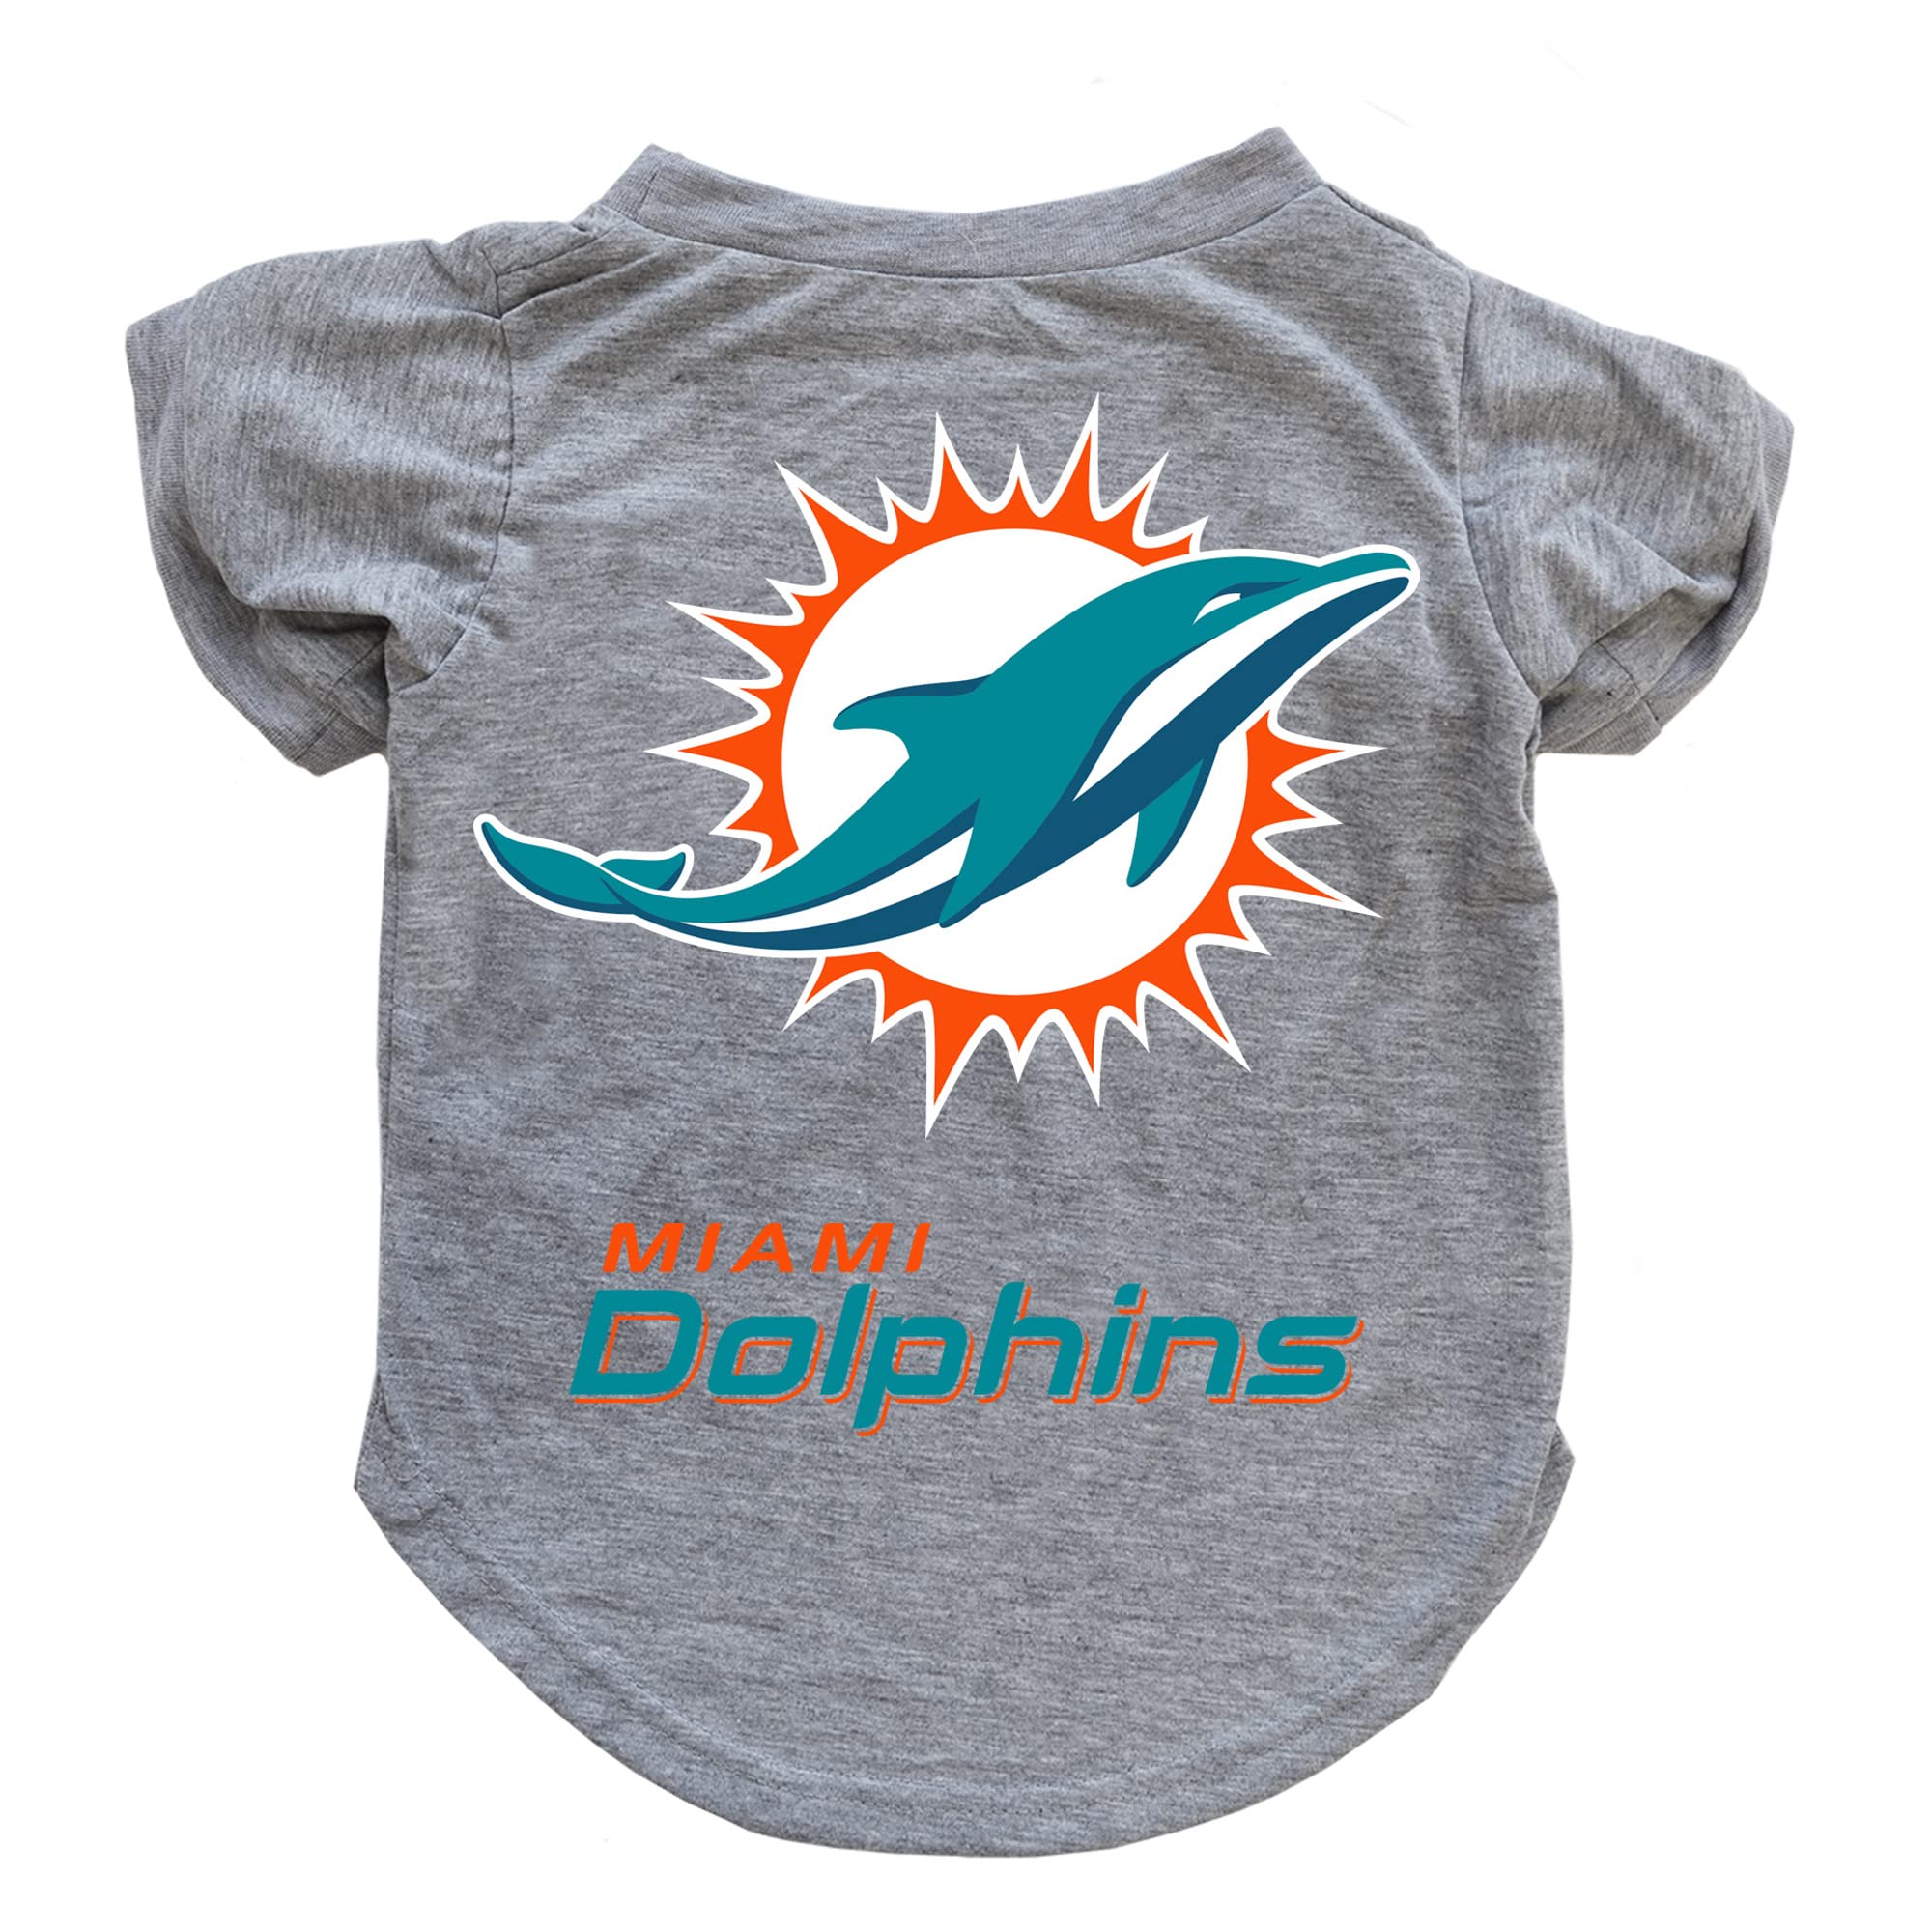 Littlearth Unisex-Adult Nfl Miami Dolphins Pet T-Shirt, Team Color, X-Large